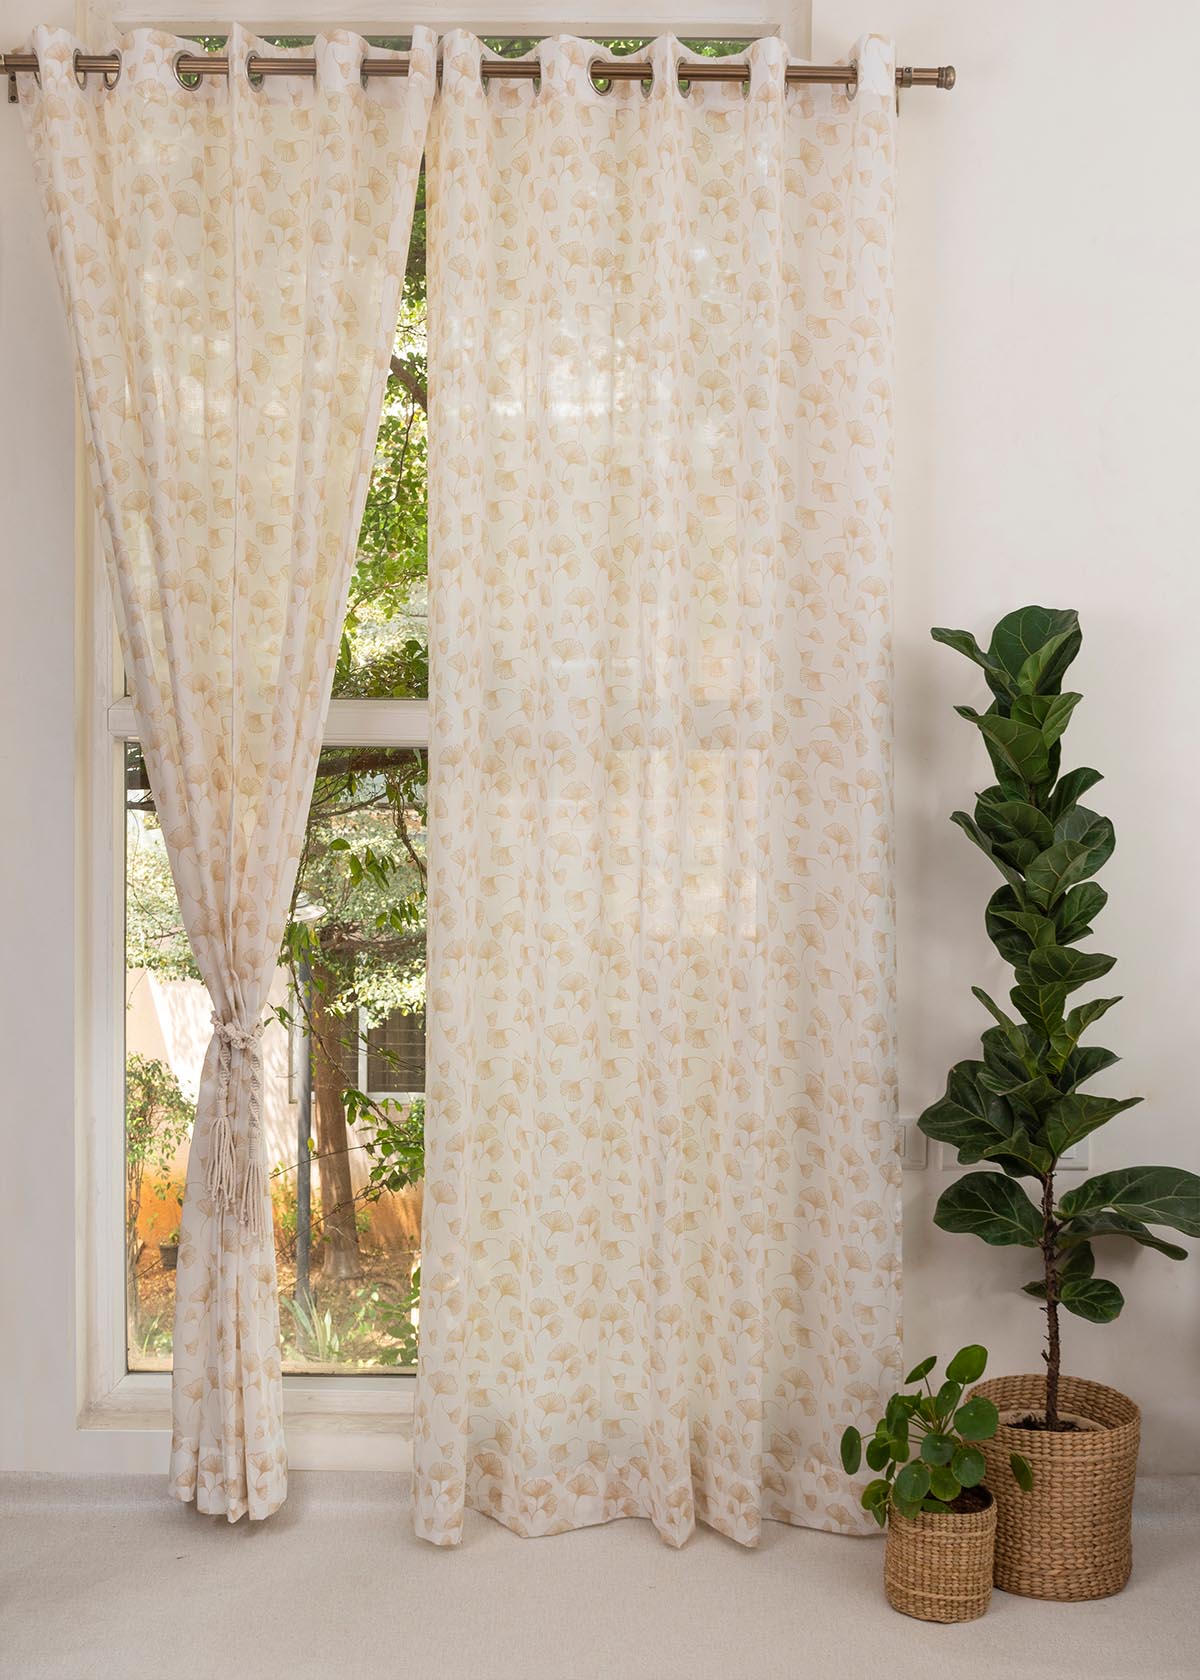 Gingko 100% cotton sheer floral curtain for living room -  Light filtering - Multicolor - Pack of 1